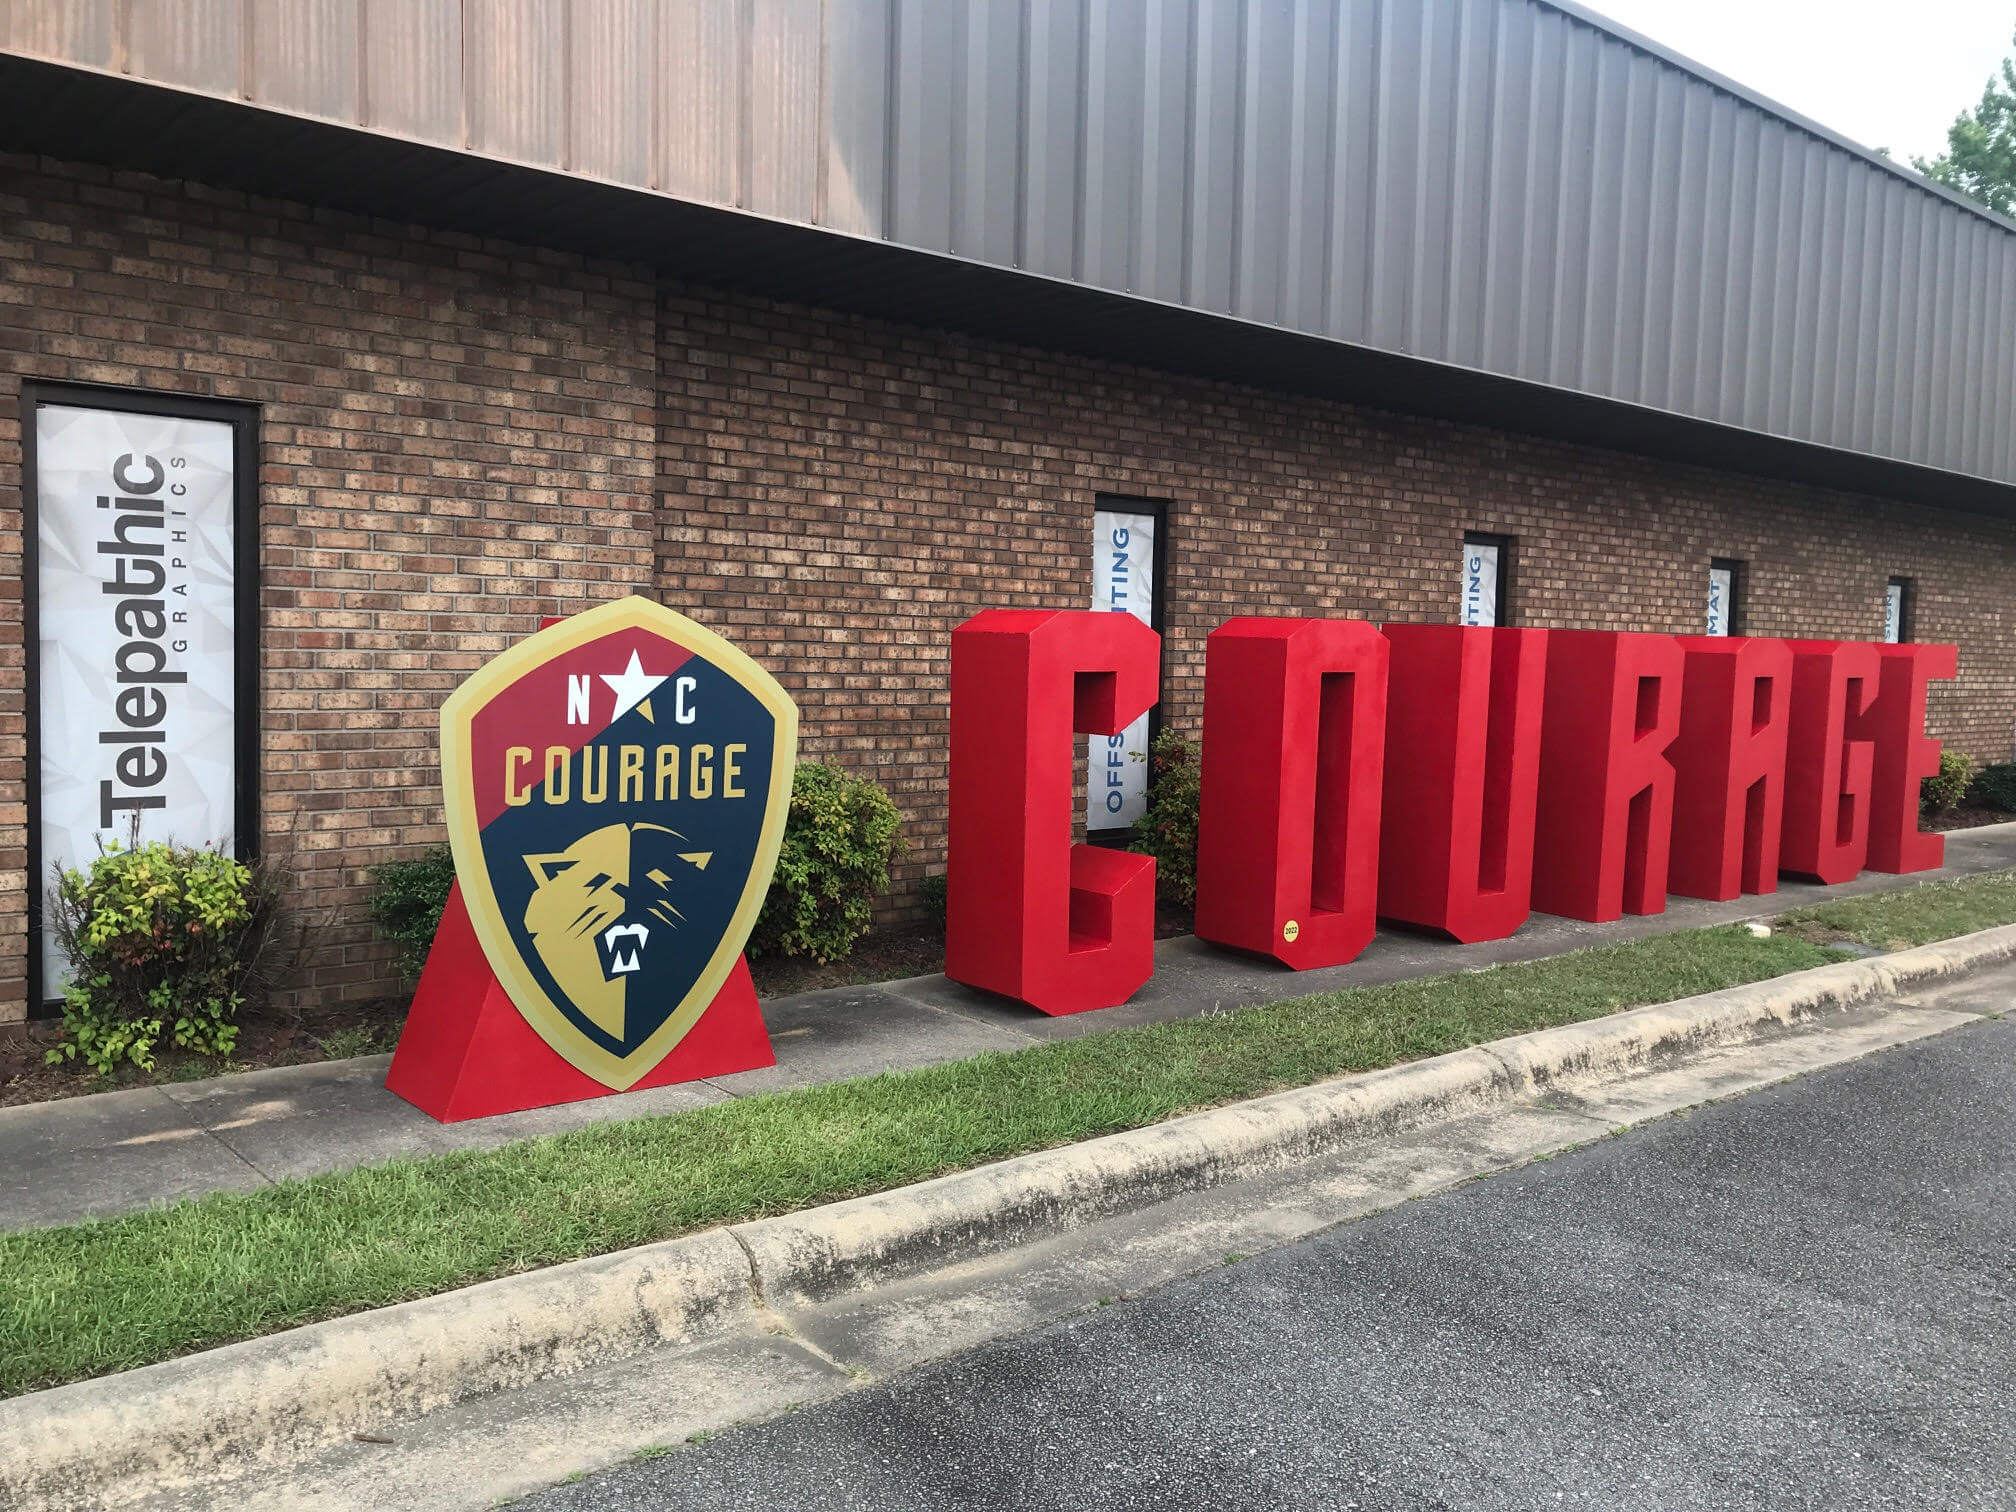 Large format printing example for NC Courage in Raleigh NC